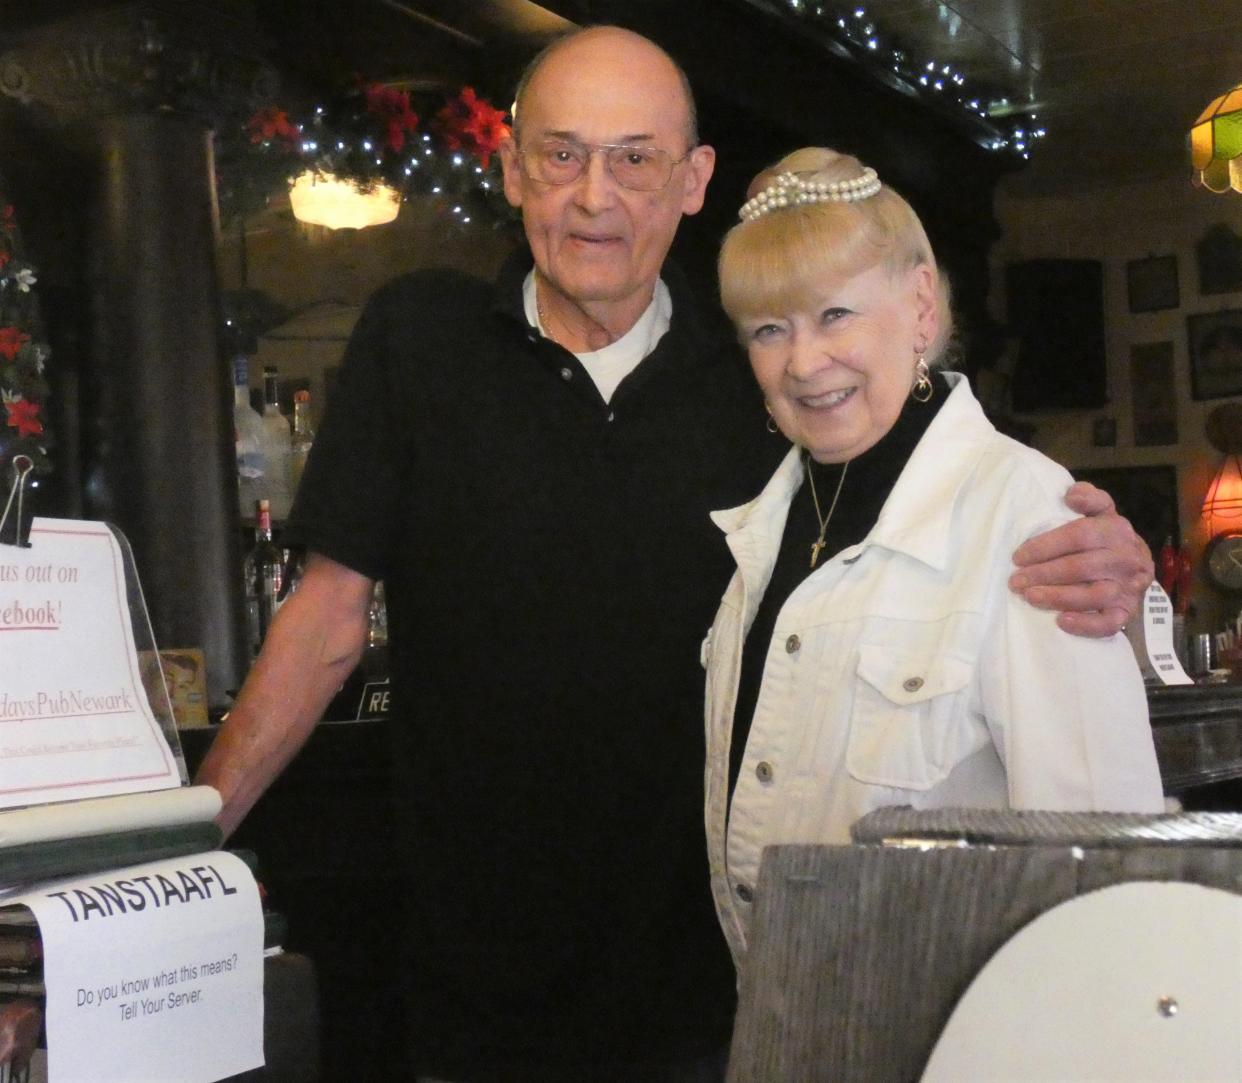 Dave and Kay Kittel have owned Yesterday's Pub, located at the corner of Wilson and South Sixth streets, for more than 40 years. It is open for dinner each week Wednesday through Sunday.